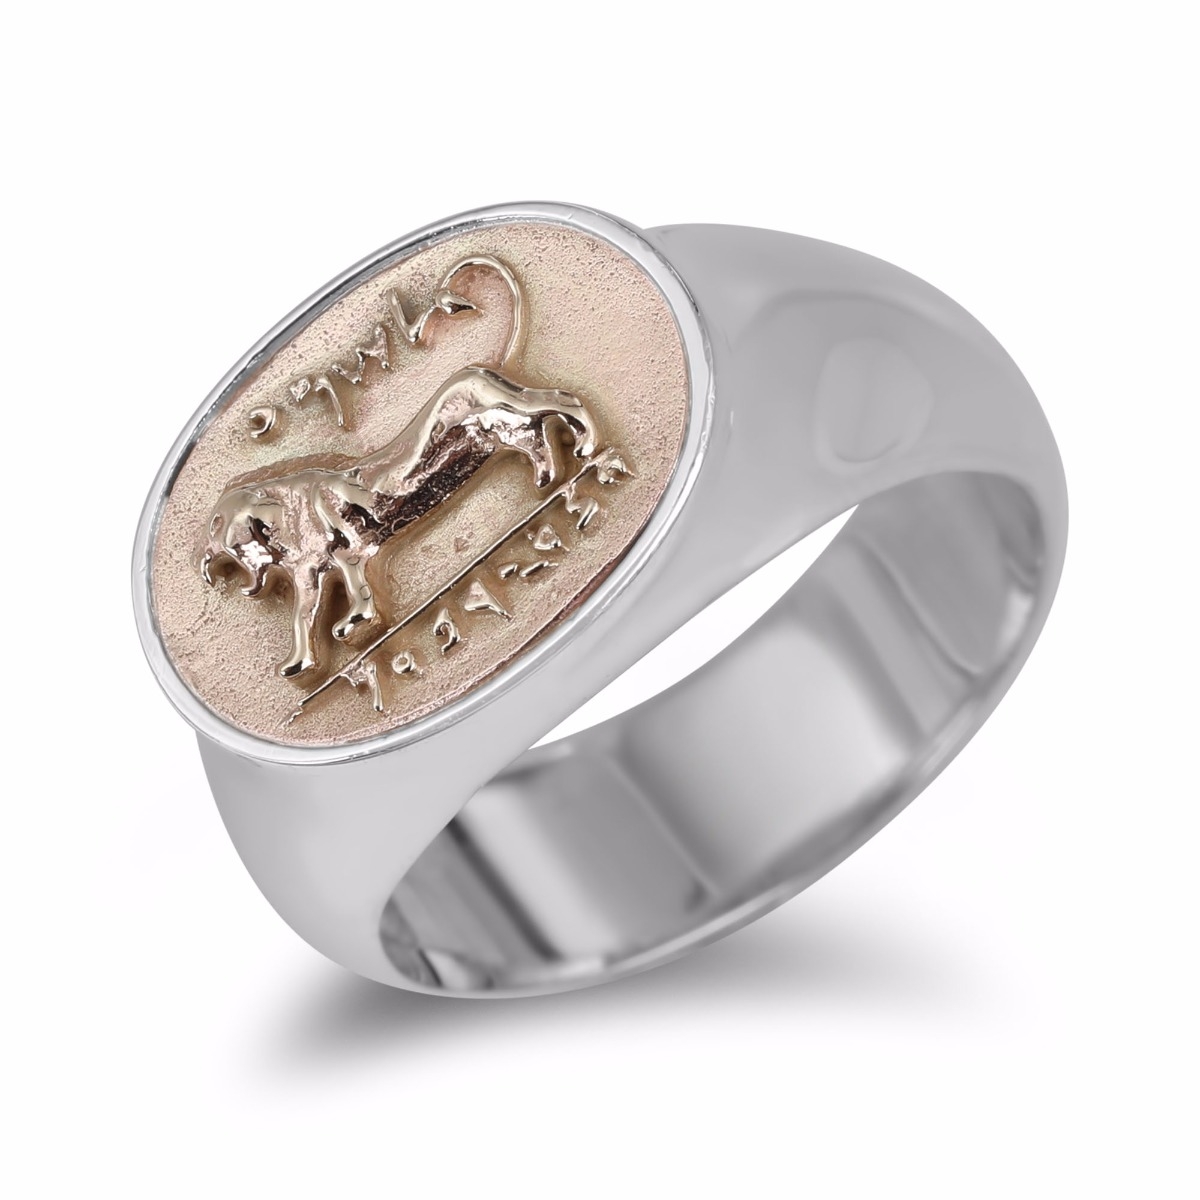 Rafael Jewelry Roaring Lion 925 Sterling Silver and 9K Gold Ring - 1